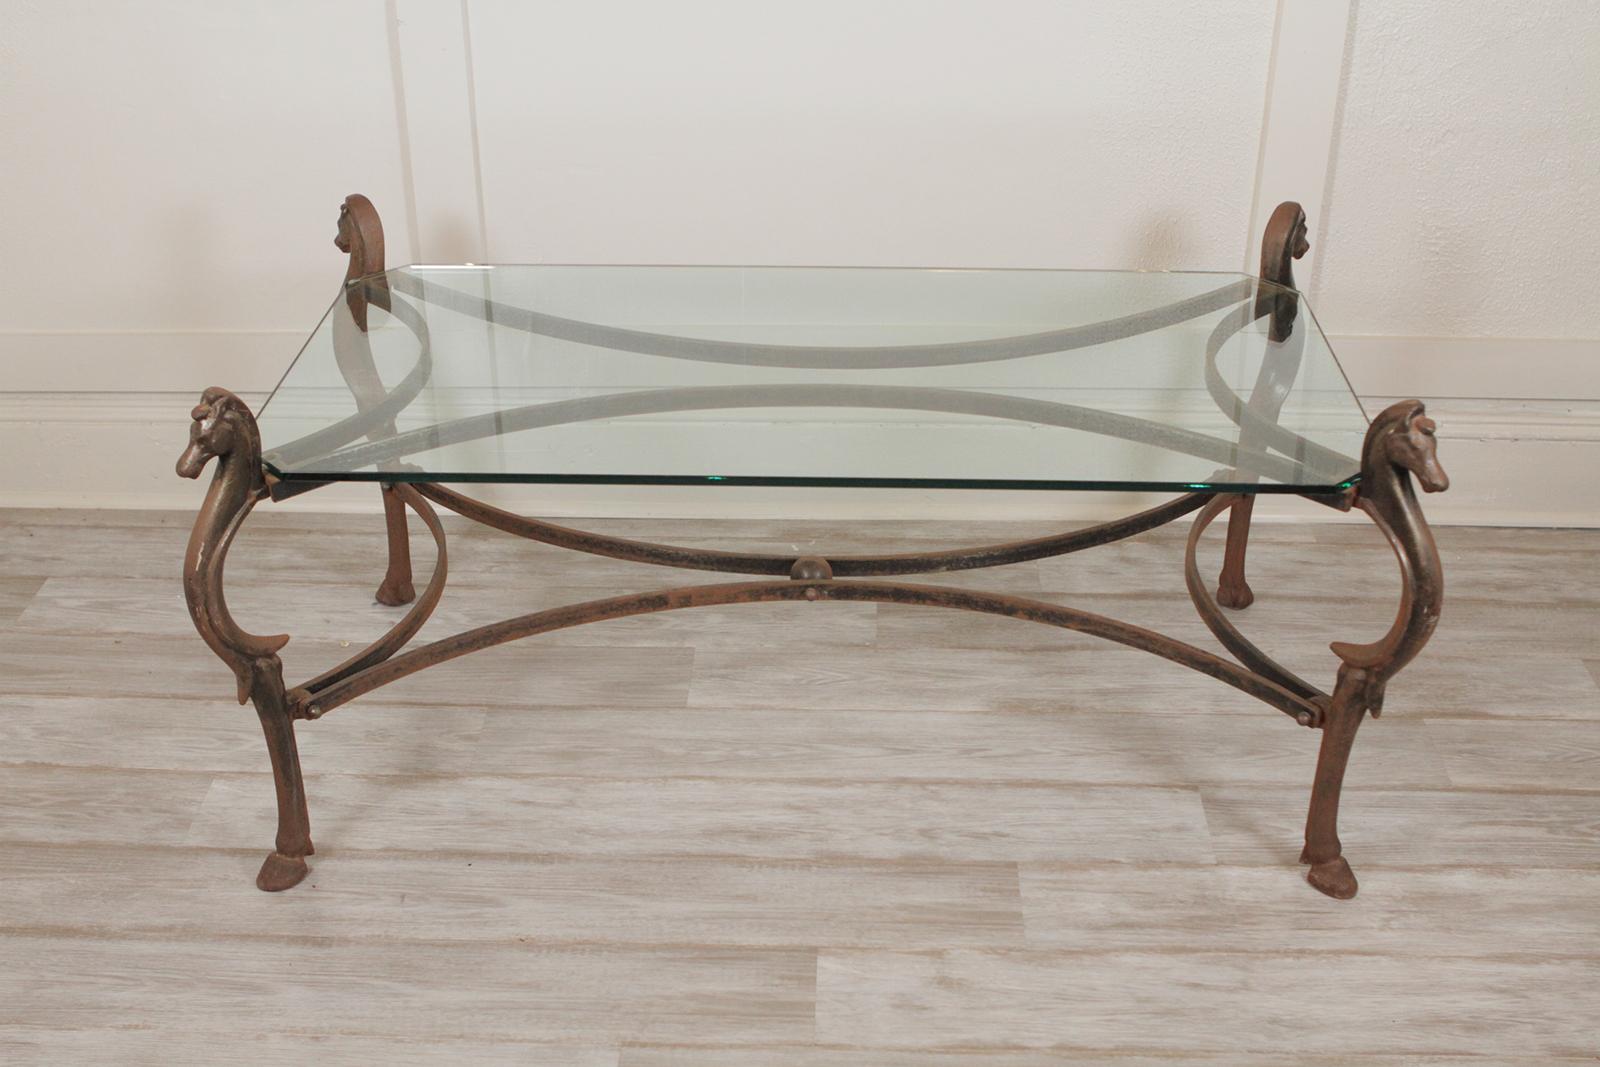 Decorative cast iron and glass top cocktail or coffee table with horse head legs
Dimensions: 48” L X 24” W X 12” H.